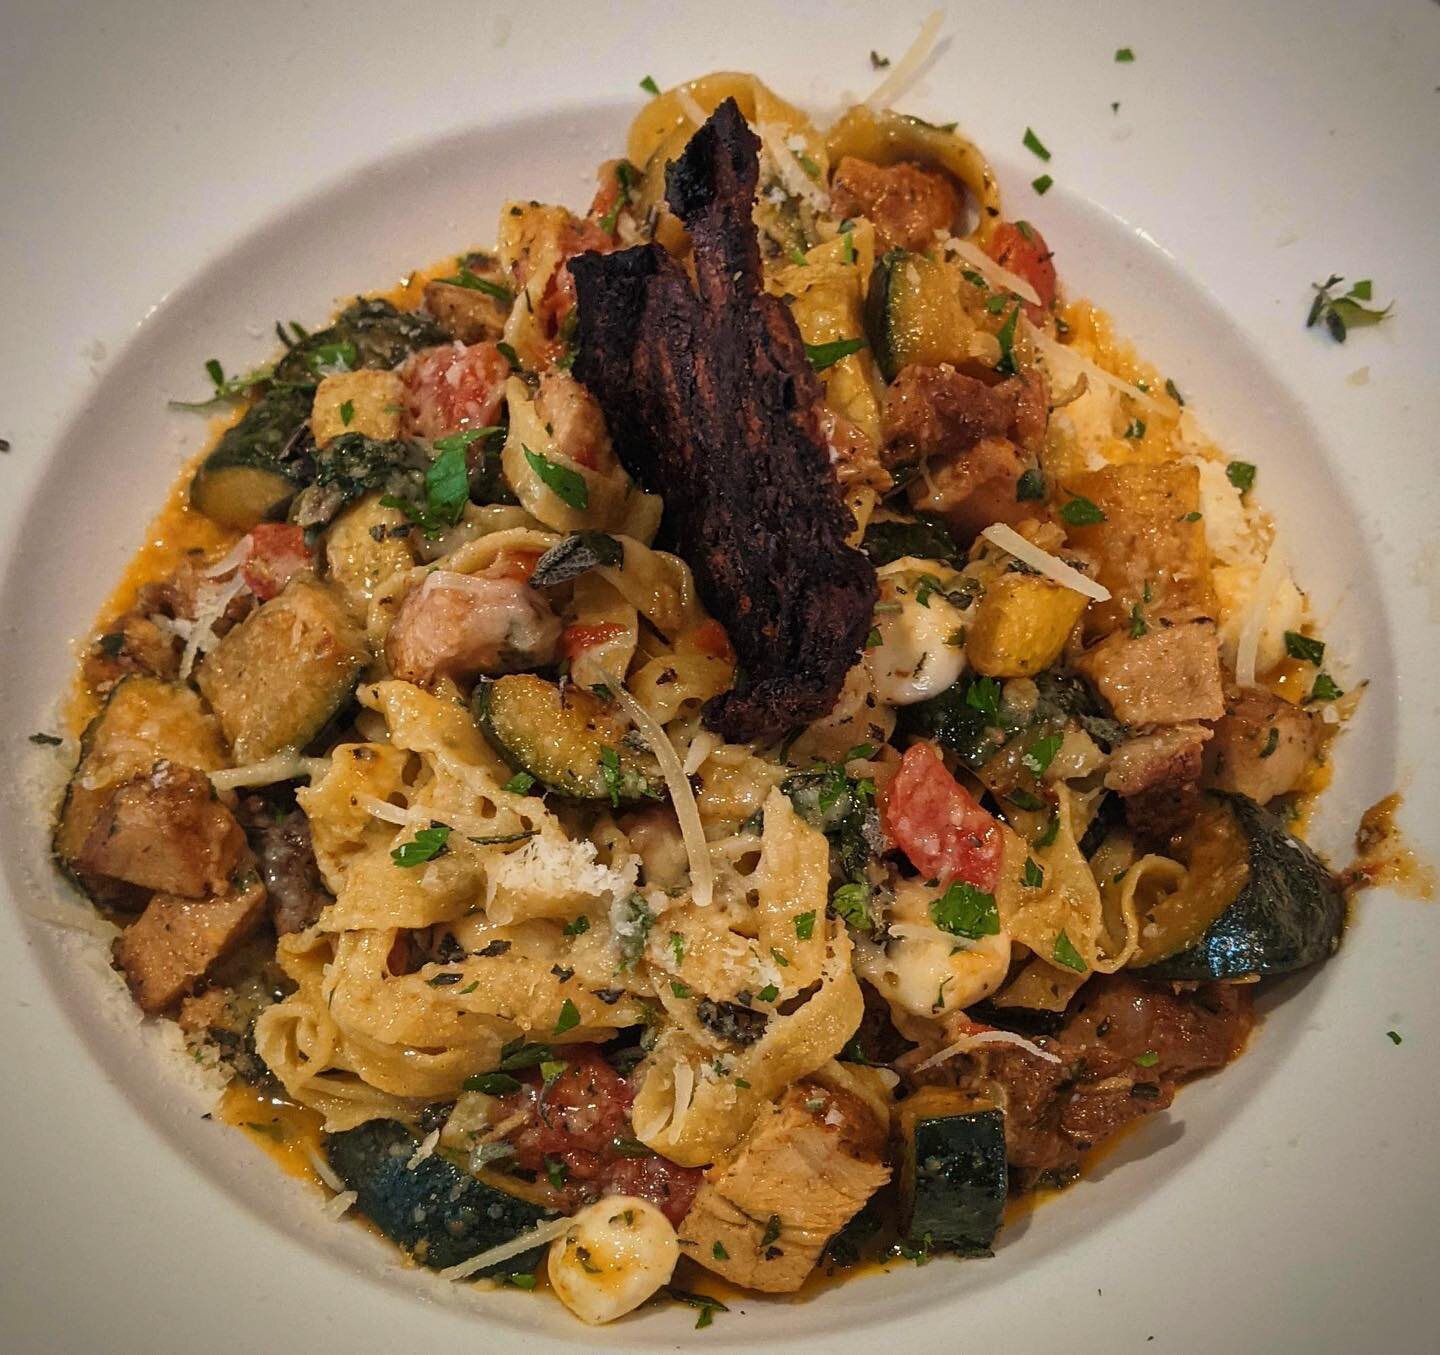 Smoked chicken pasta with house-made fettuccini, zucchini, summer squash, smoked tomato, spinach, and fresh mozzarella pearls!  Come in and give it a try, it&rsquo;s delicious!! Open 5-9pm tonight 😃